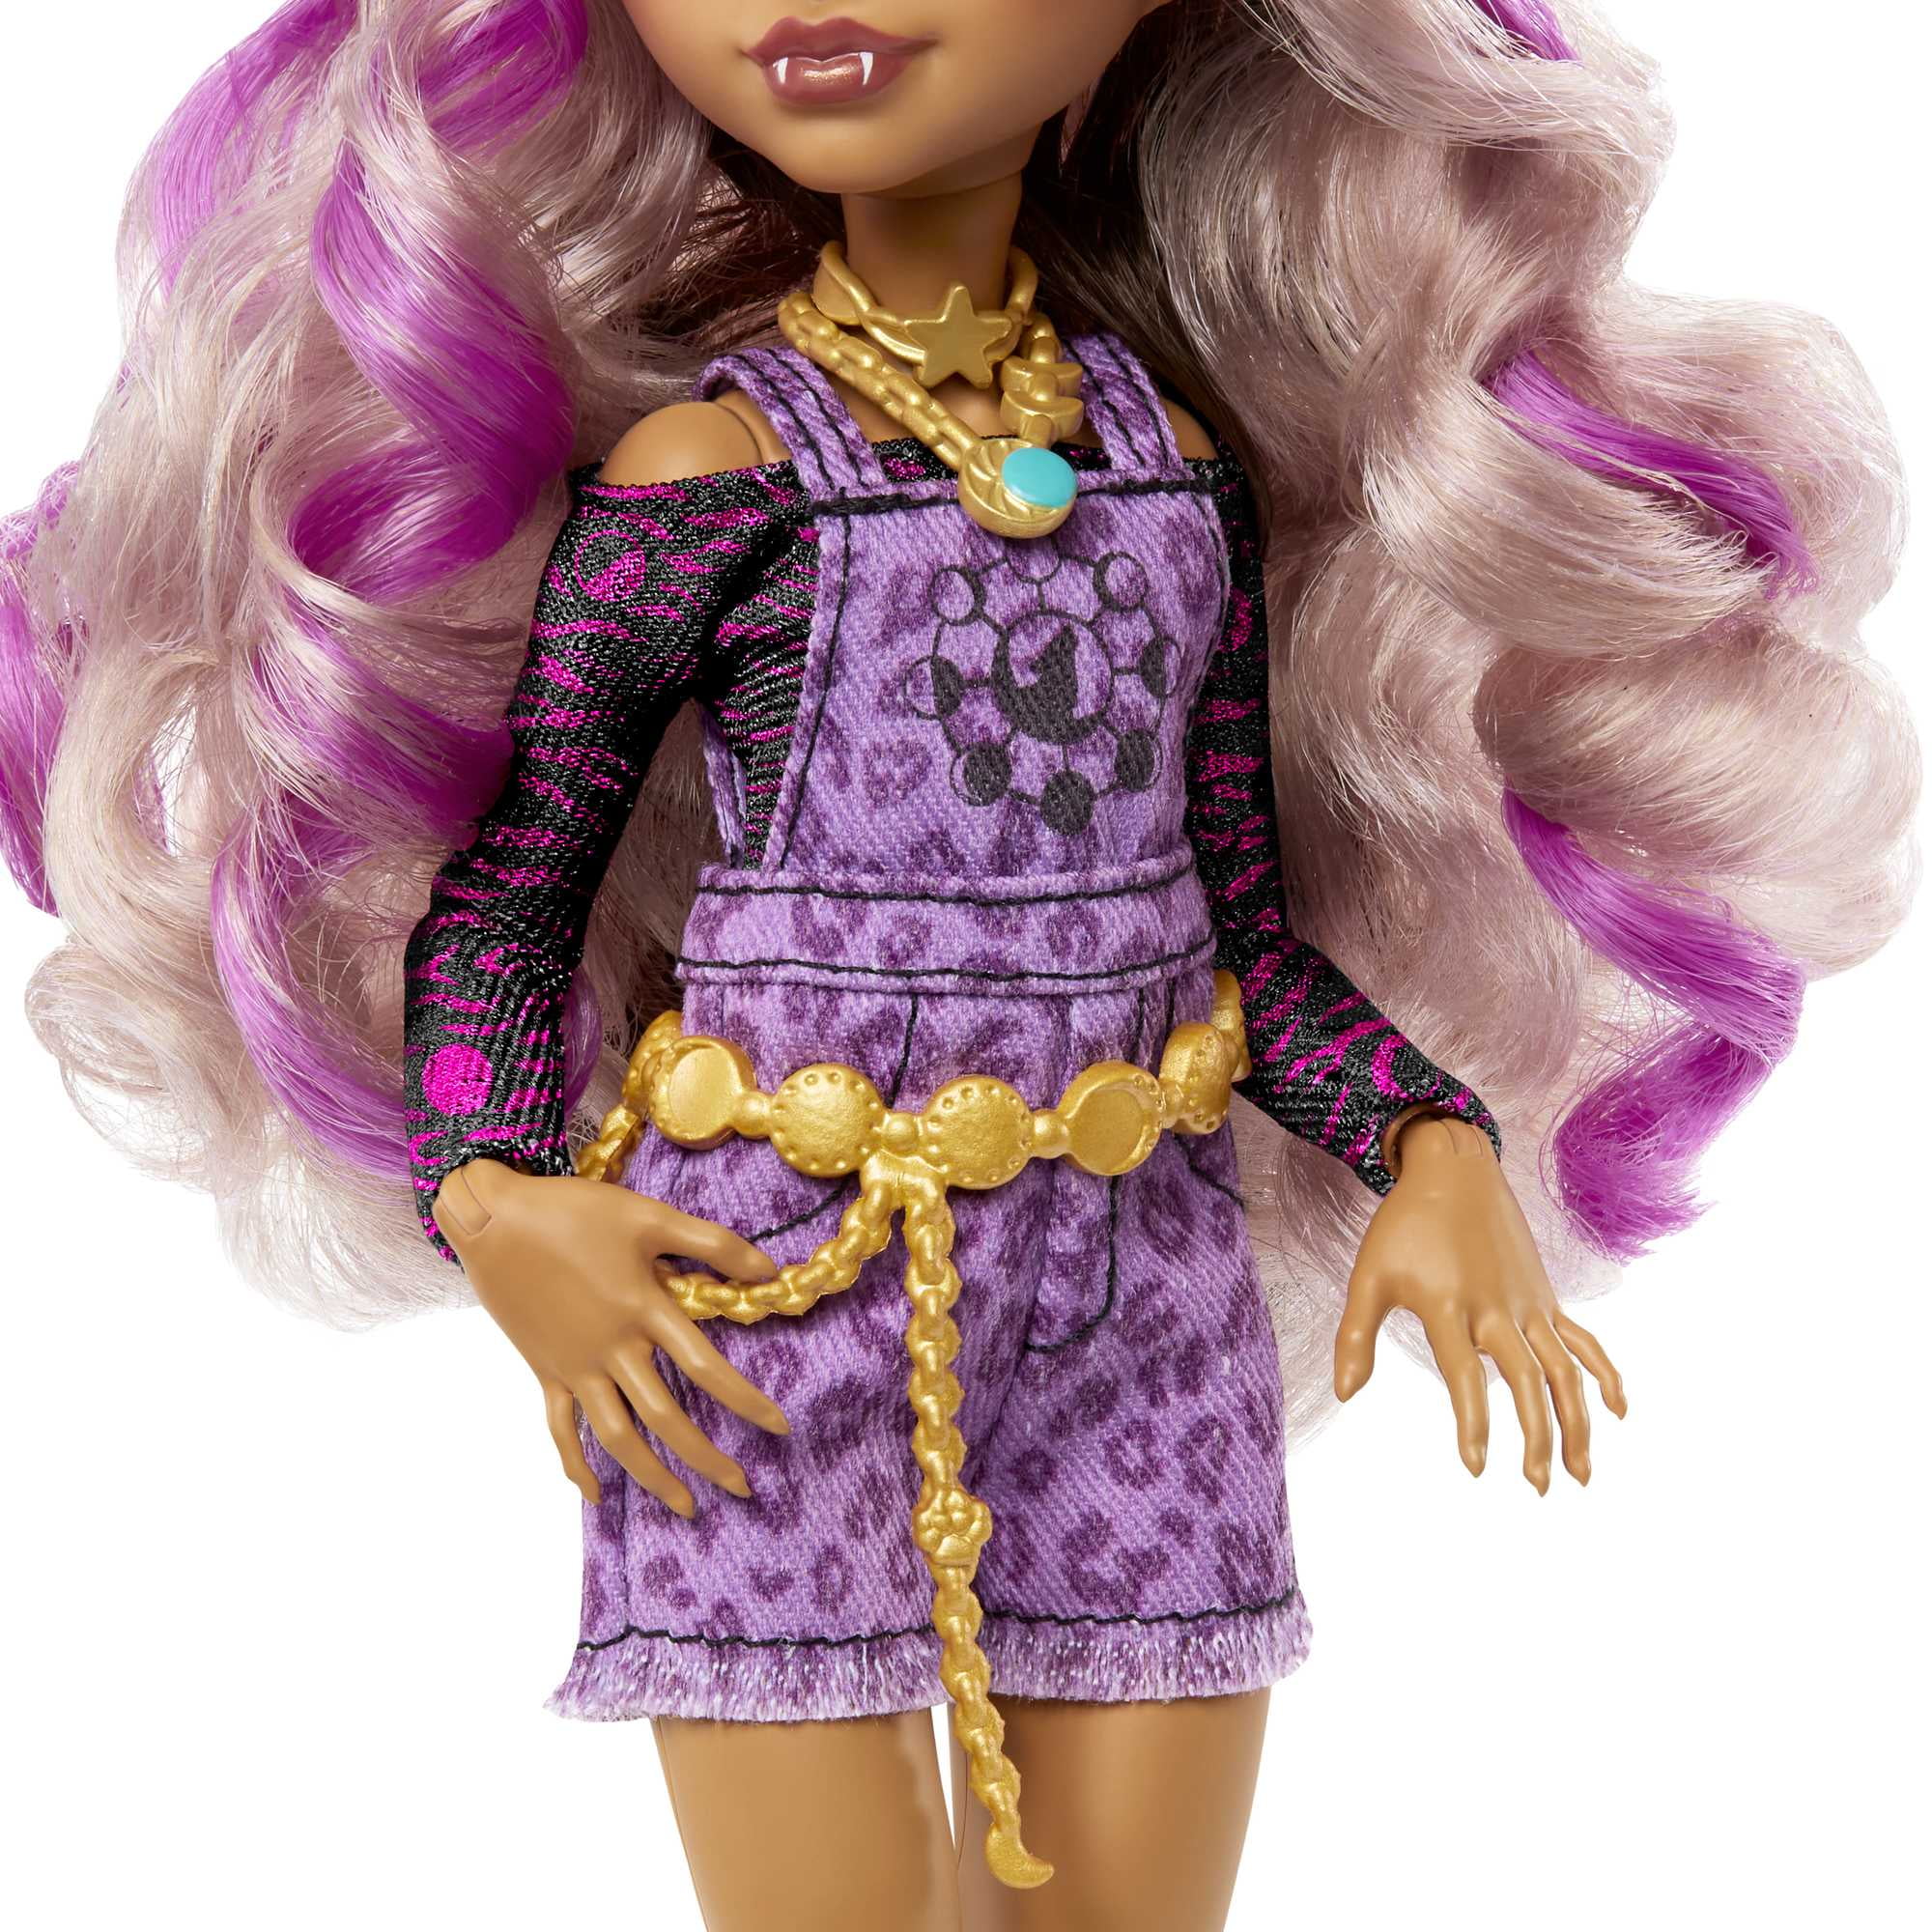 chase baratte share pictures of clawdeen wolf photos